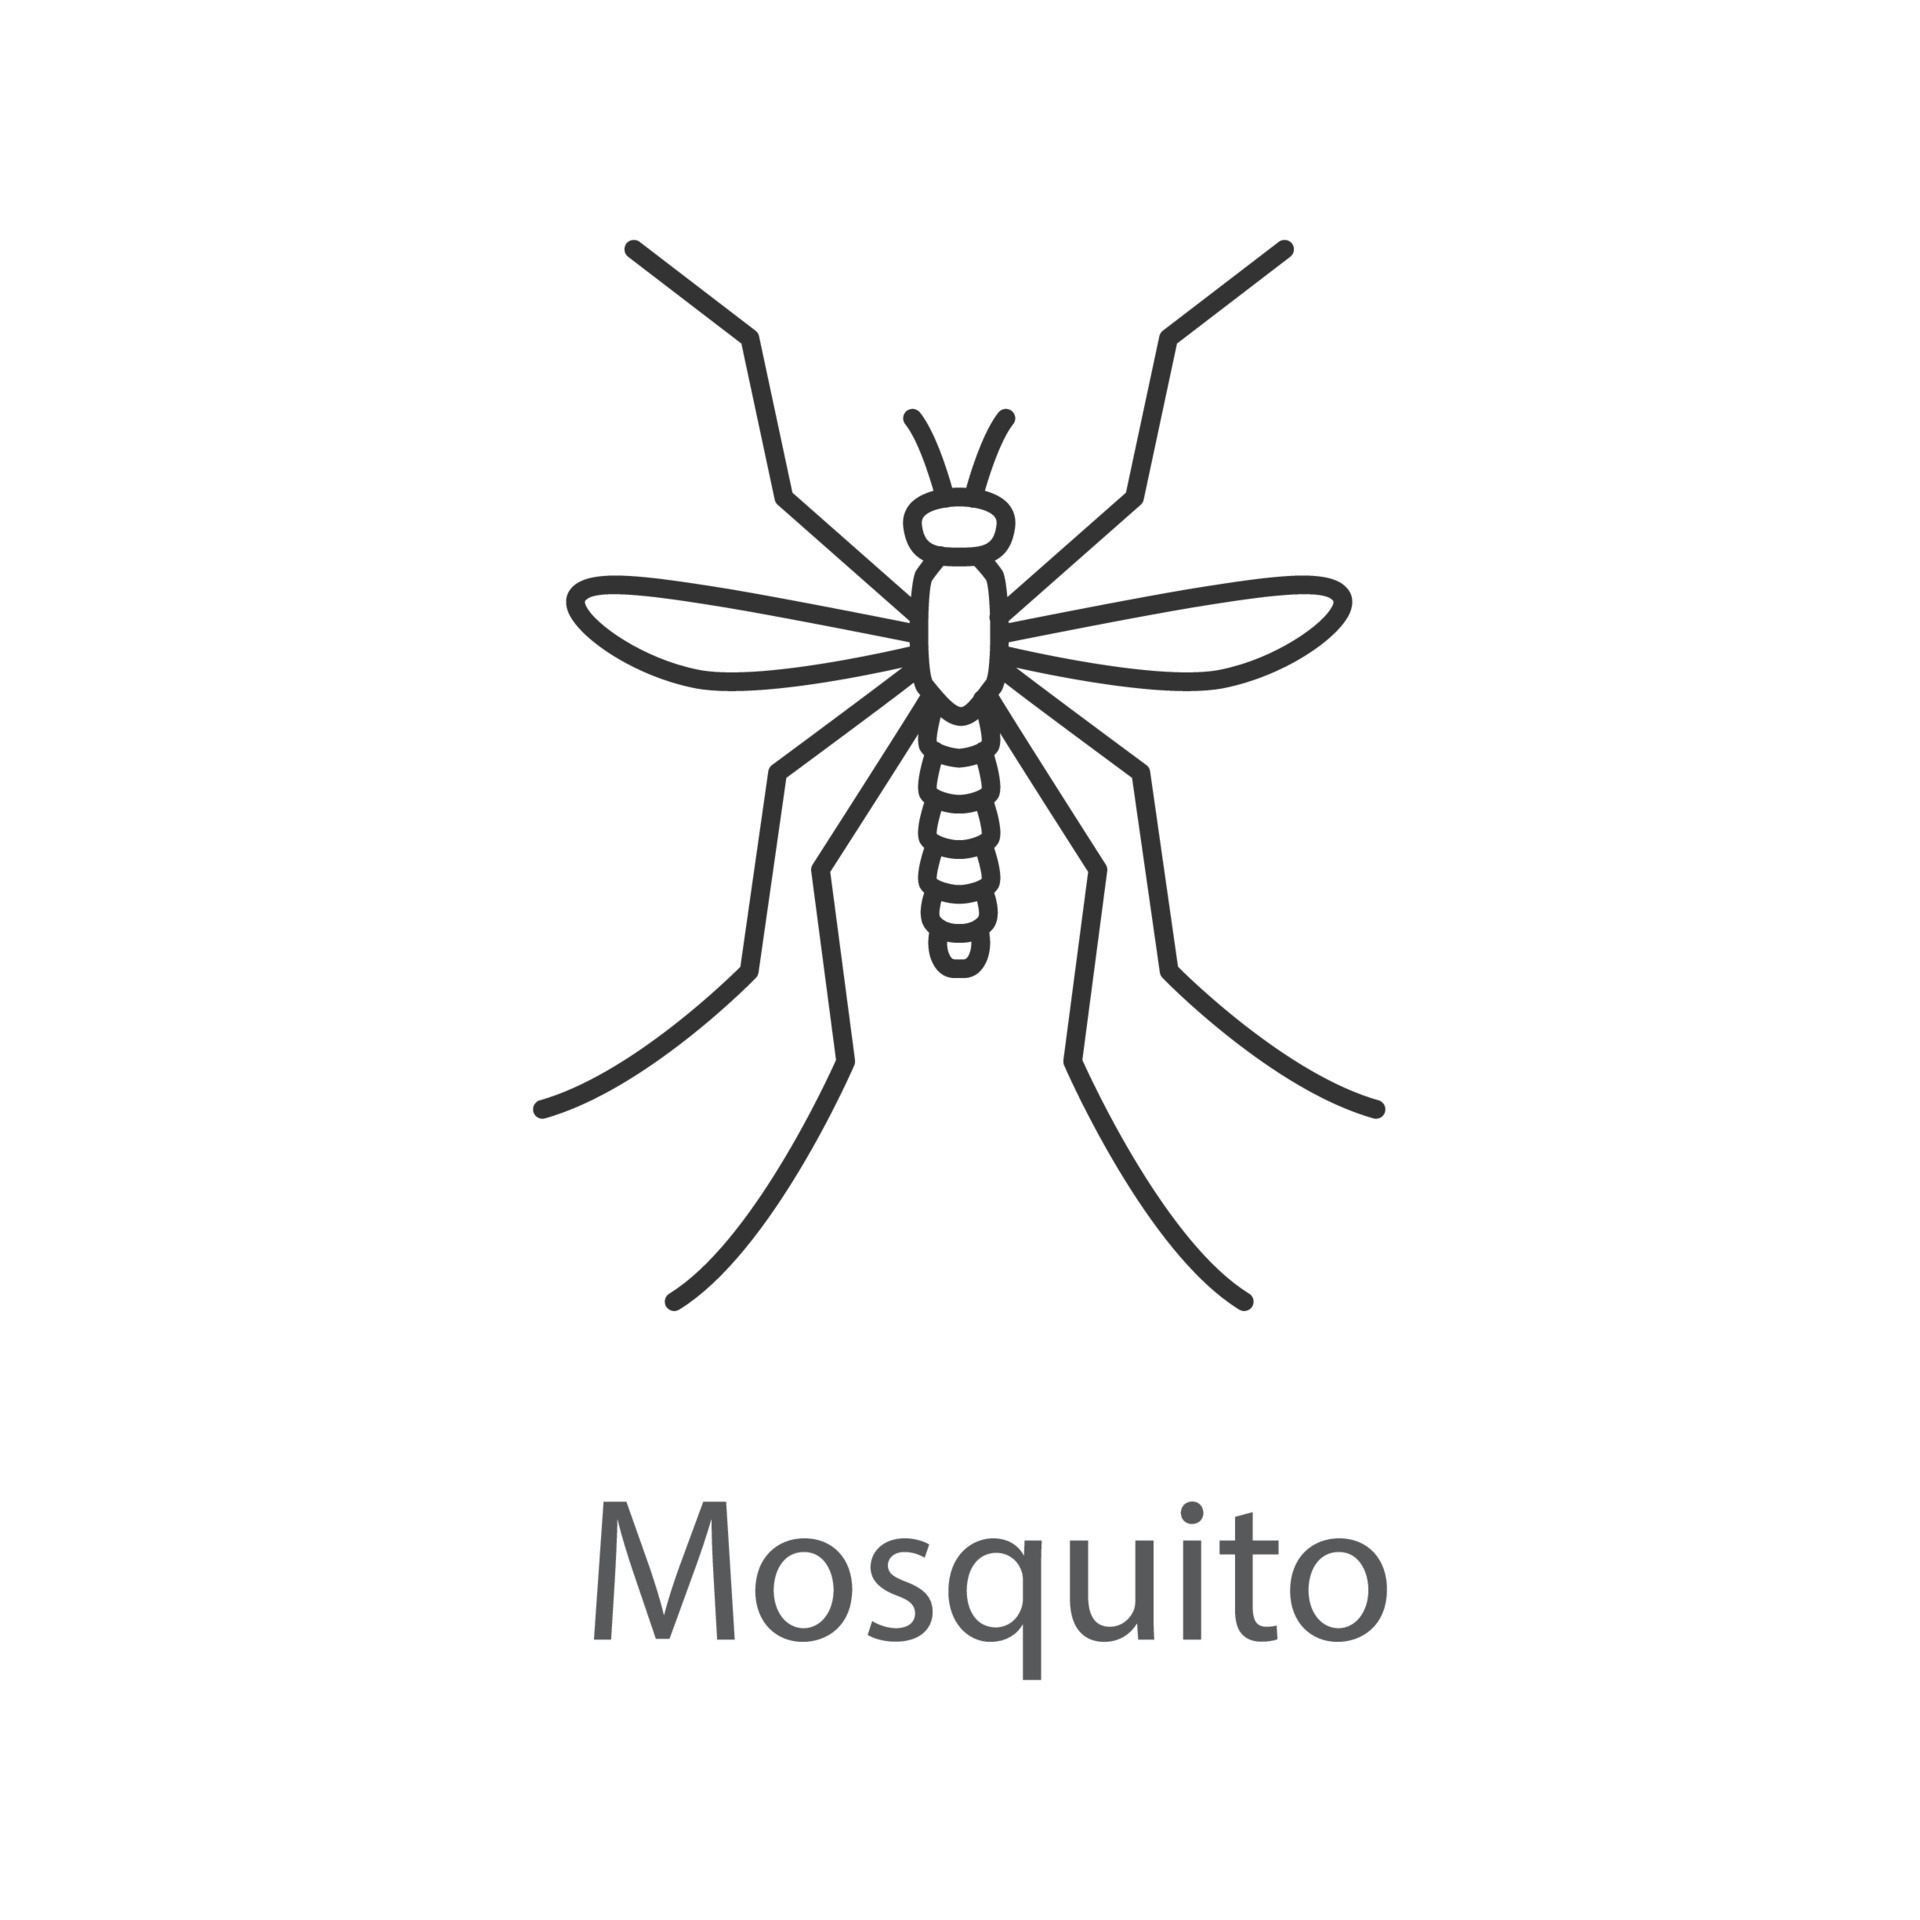 How To Draw Mosquito Emoji Step by Step  9 Easy Phase